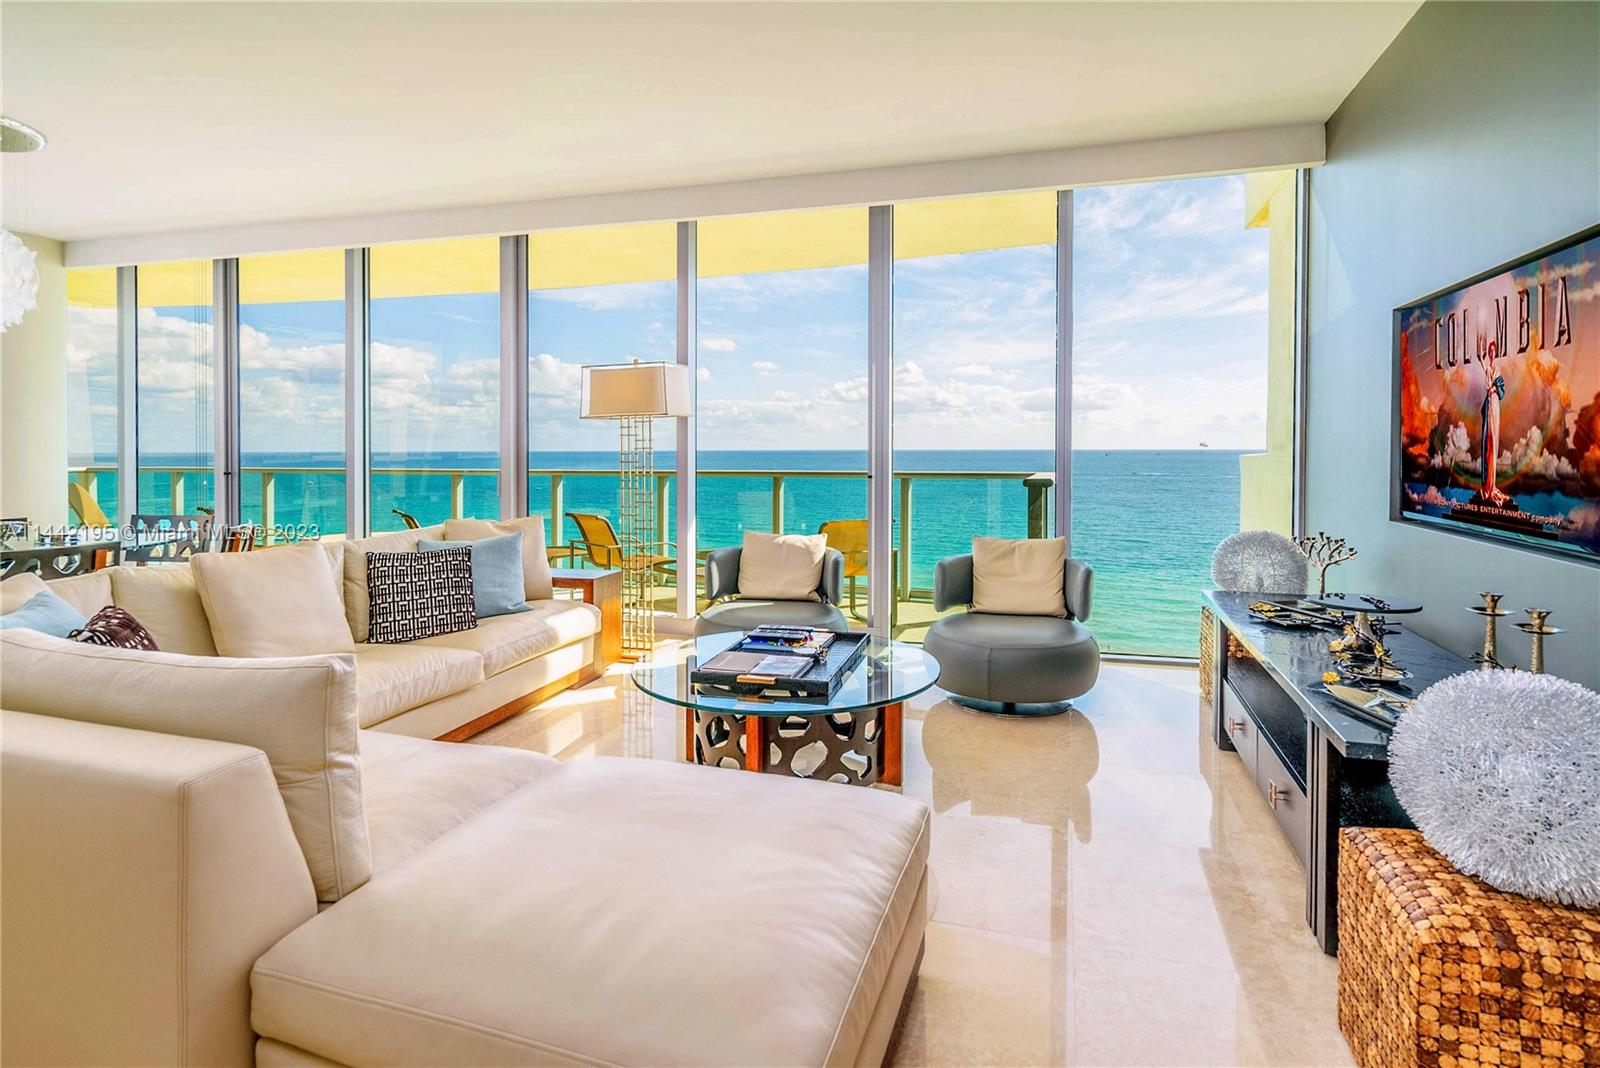 Panoramic views of Miami Beach and Atlantic Ocean are the centerpiece of this NE corner oceanfront lower Penthouse. This sanctuary of serenity features a spacious primary bedroom with a hallway of closets and two separate bathrooms, European kitchen with Subzero and Miele appliances and wraparound 10 ft. glass walls and terraces framing the ocean. The open plan creates an incredible flow of space and freedom while serving as the epicenter for hosting and entertaining. Designed by Luis Revuelta, Il Villaggio is an iconic luxury, Art Deco building situated on world-famous Ocean Drive. Il Villaggio remains at the forefront of luxury with five star amenities that include a new fitness center, concierge, 24/7 reception, valet and security, and more!